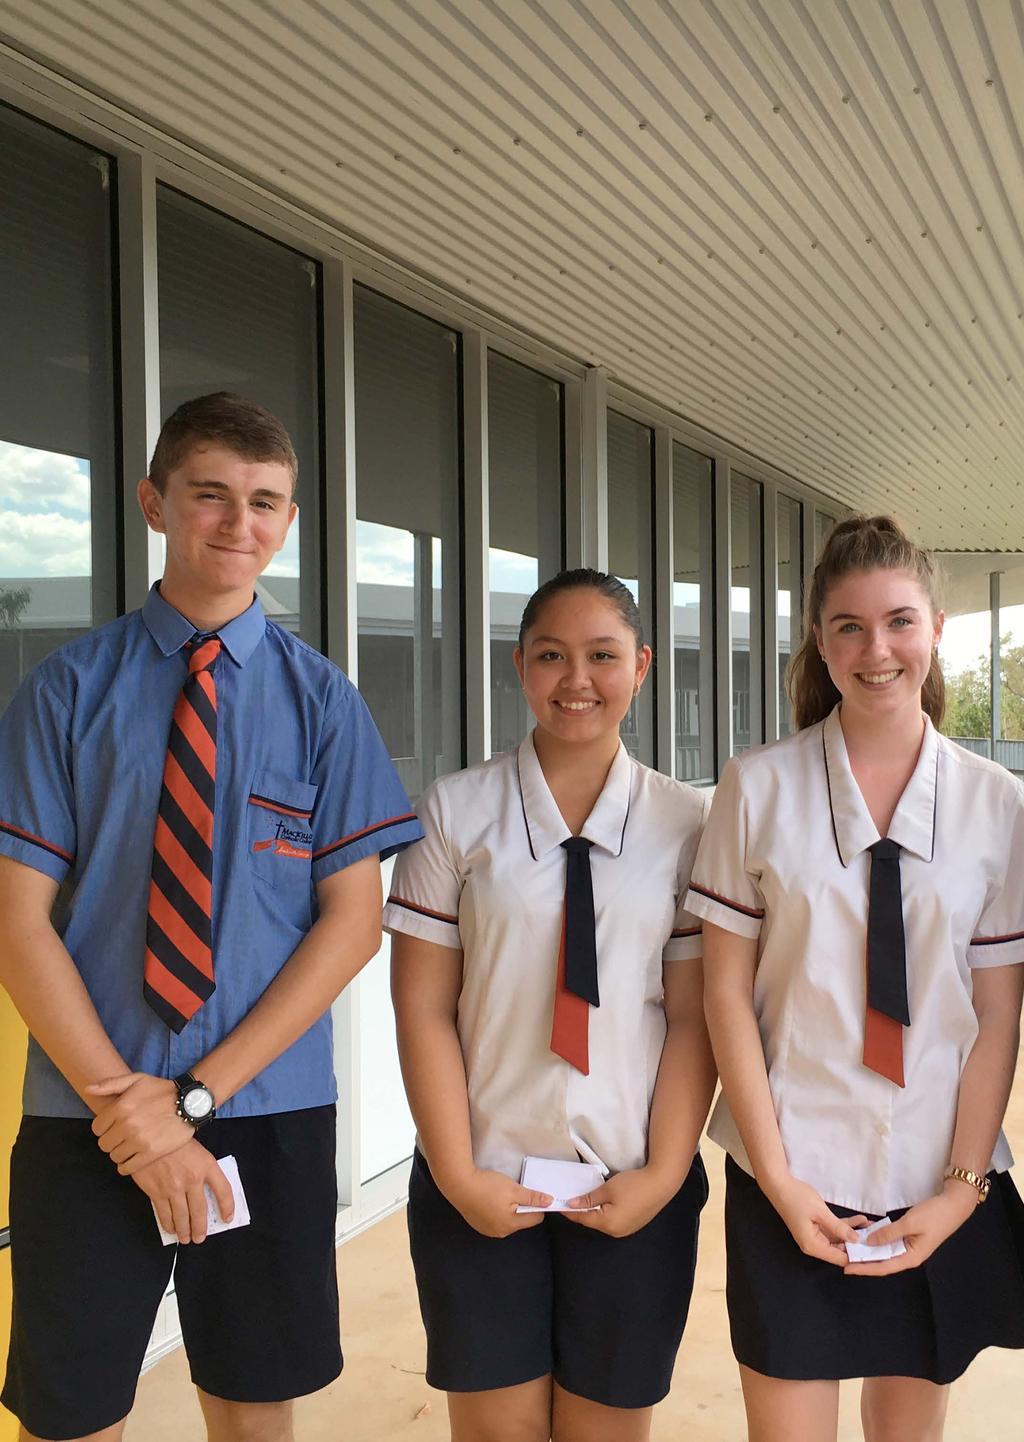 Our Uniform Students at MacKillop Catholic College wear a uniform to connect them to their school community.